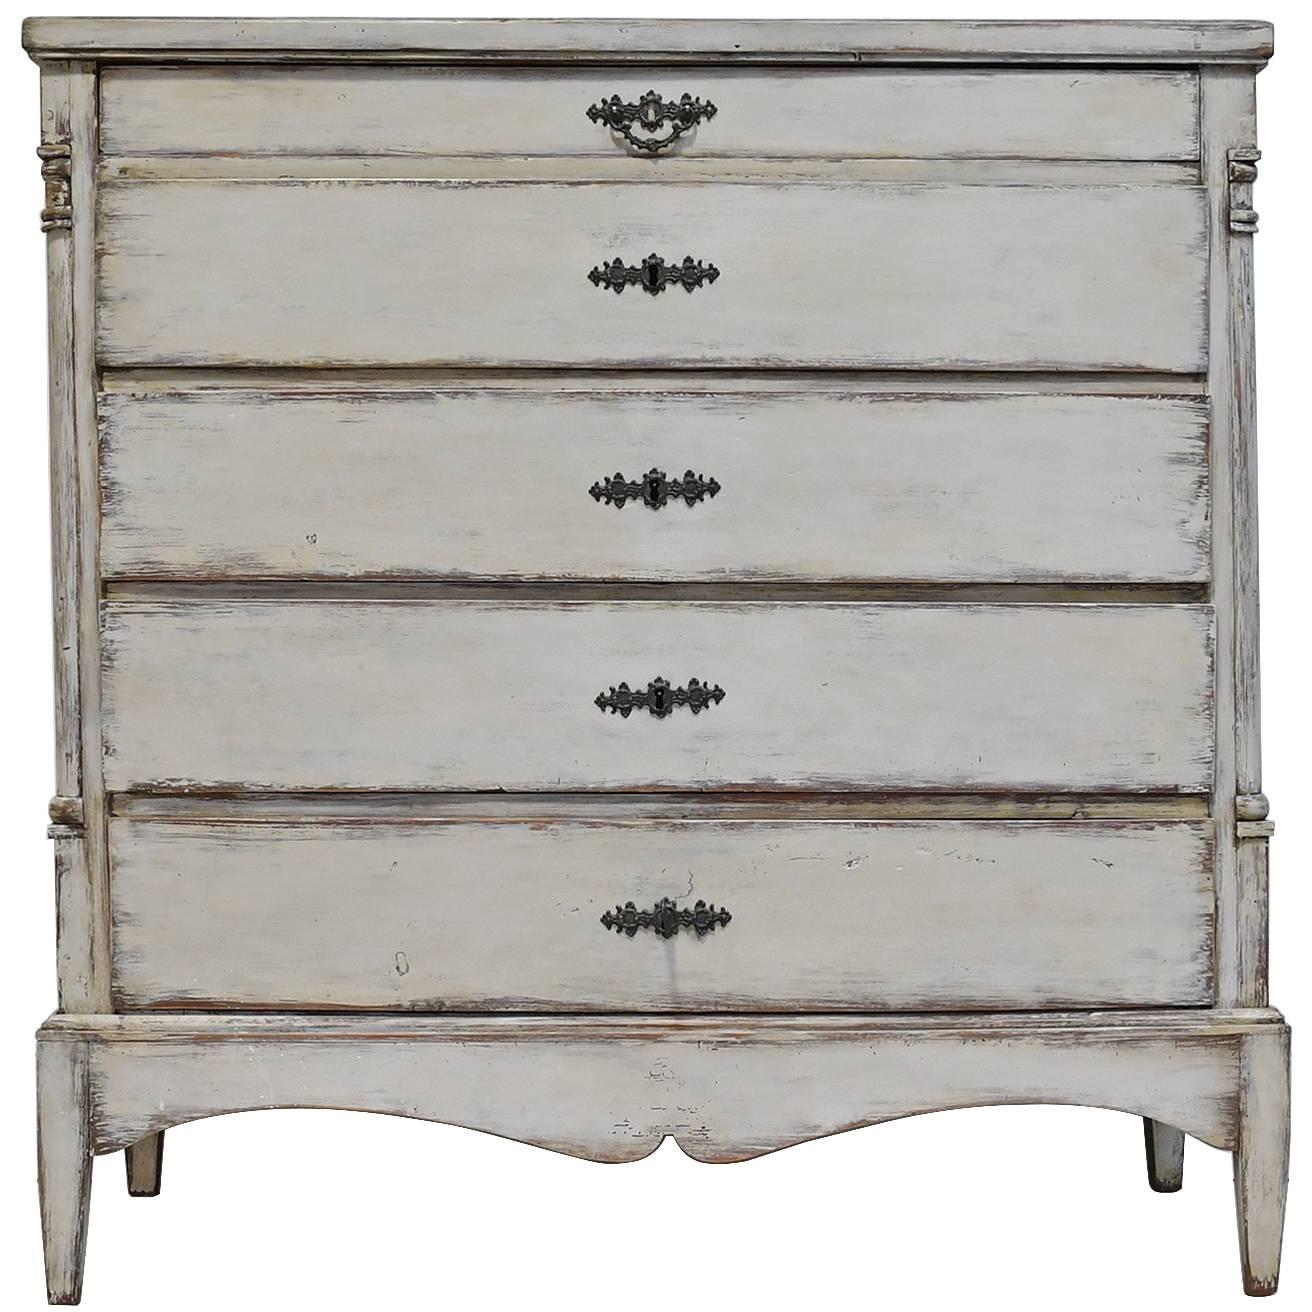 Antique Painted Scandinavian Chest of Drawers, circa 1790